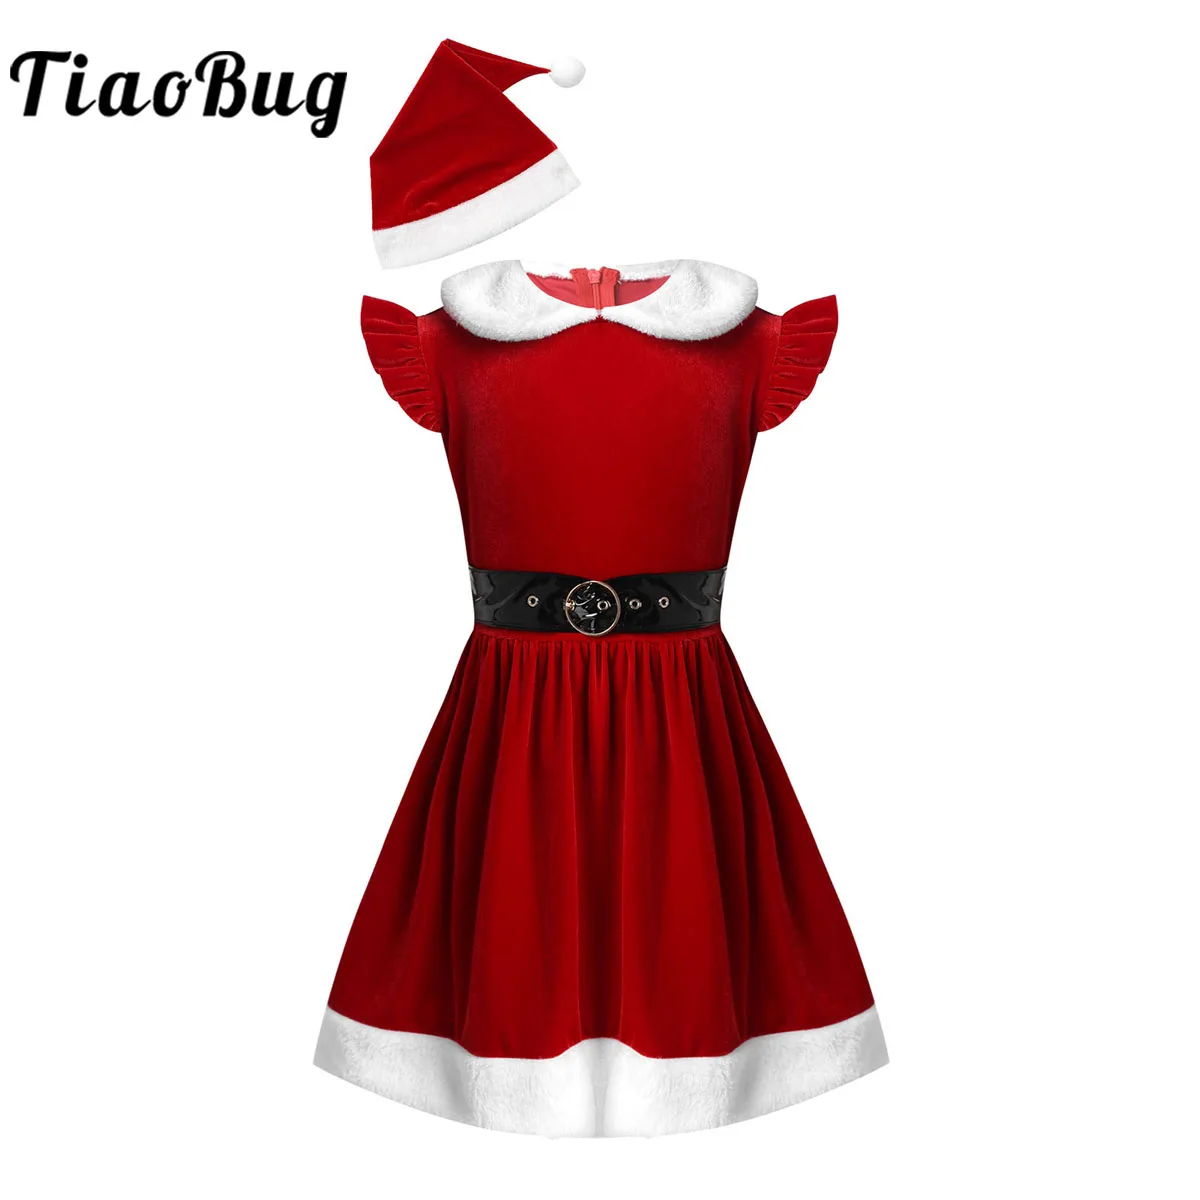 Toddler Girls Christmas Dress Outfit Kids Sleeveless Furry Neck Velvet Tutu Party Cosplay Princess Santa Claus Costume with Hat